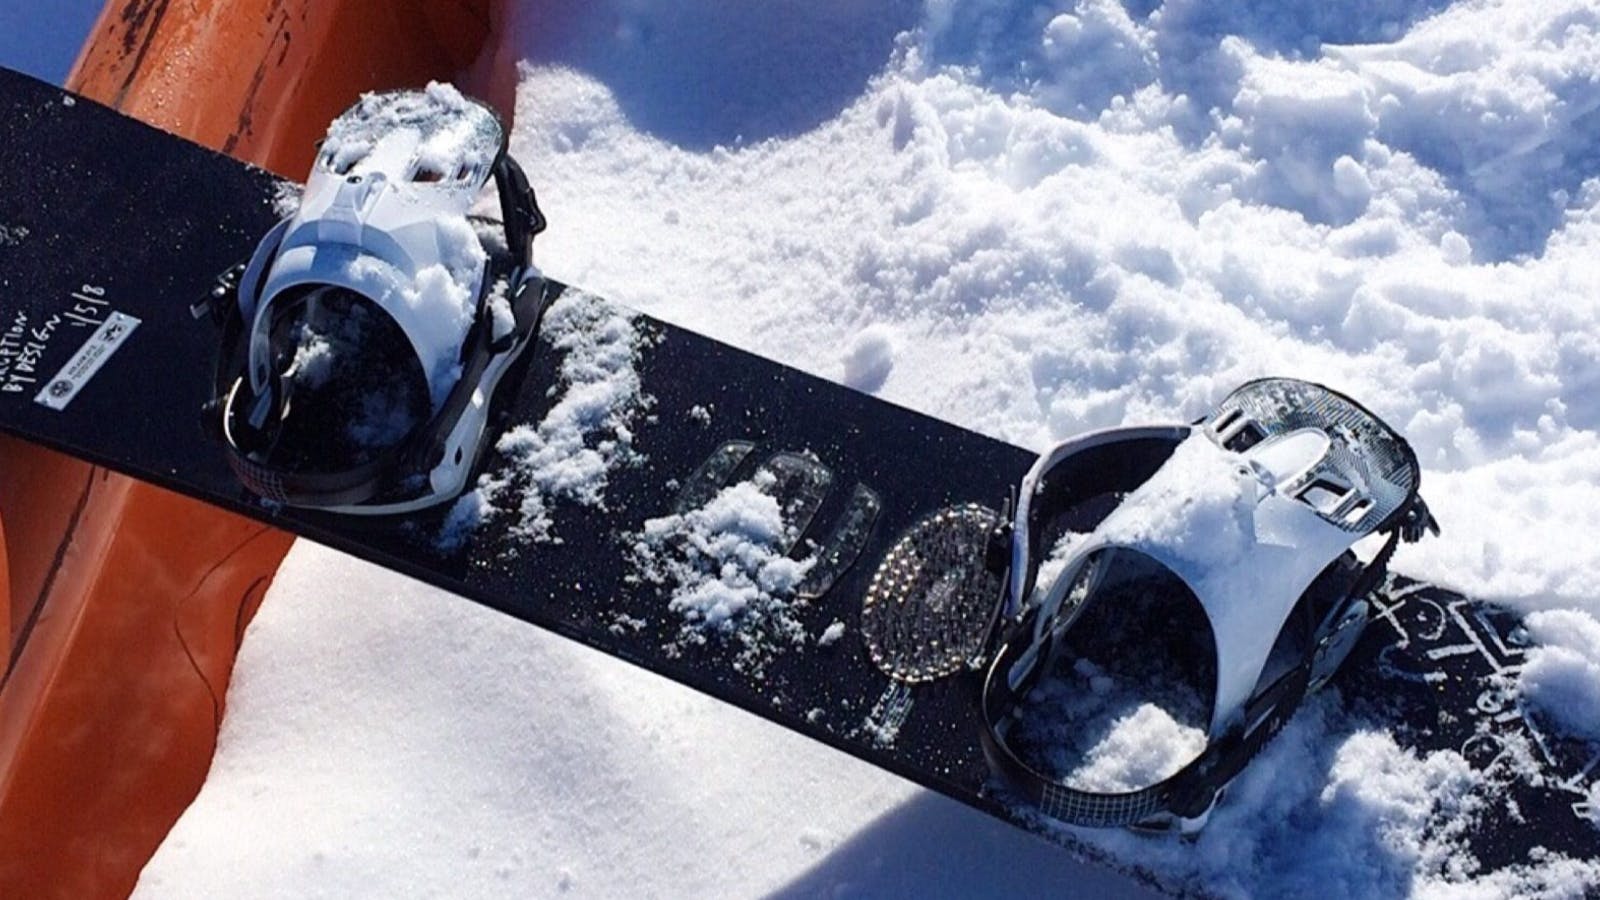 A snowboard with bindings sits in the snow, propped against a rail. 